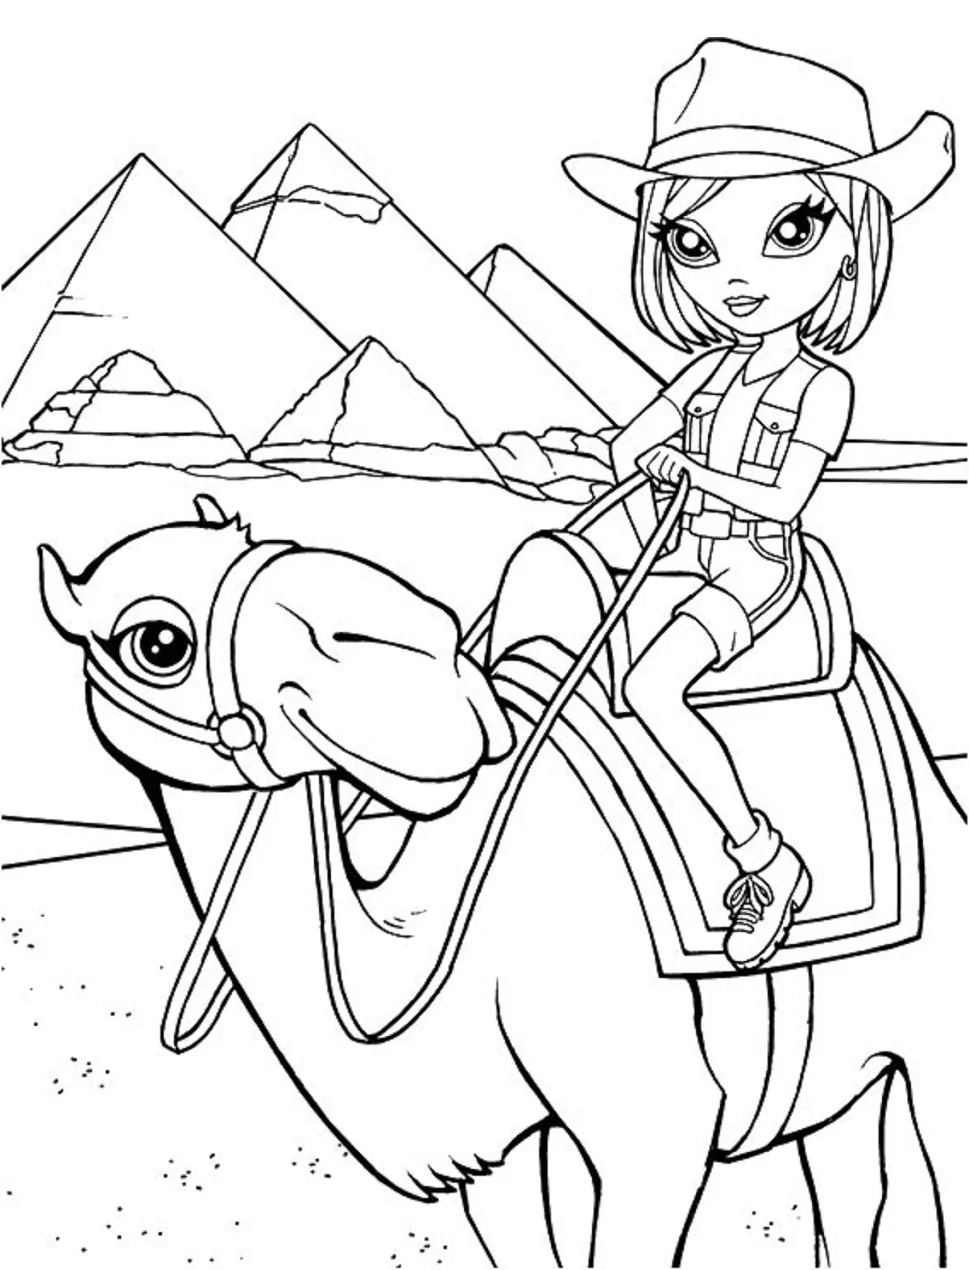 160 Lisa Frank coloring pages ideas  coloring pages, lisa frank, coloring  books